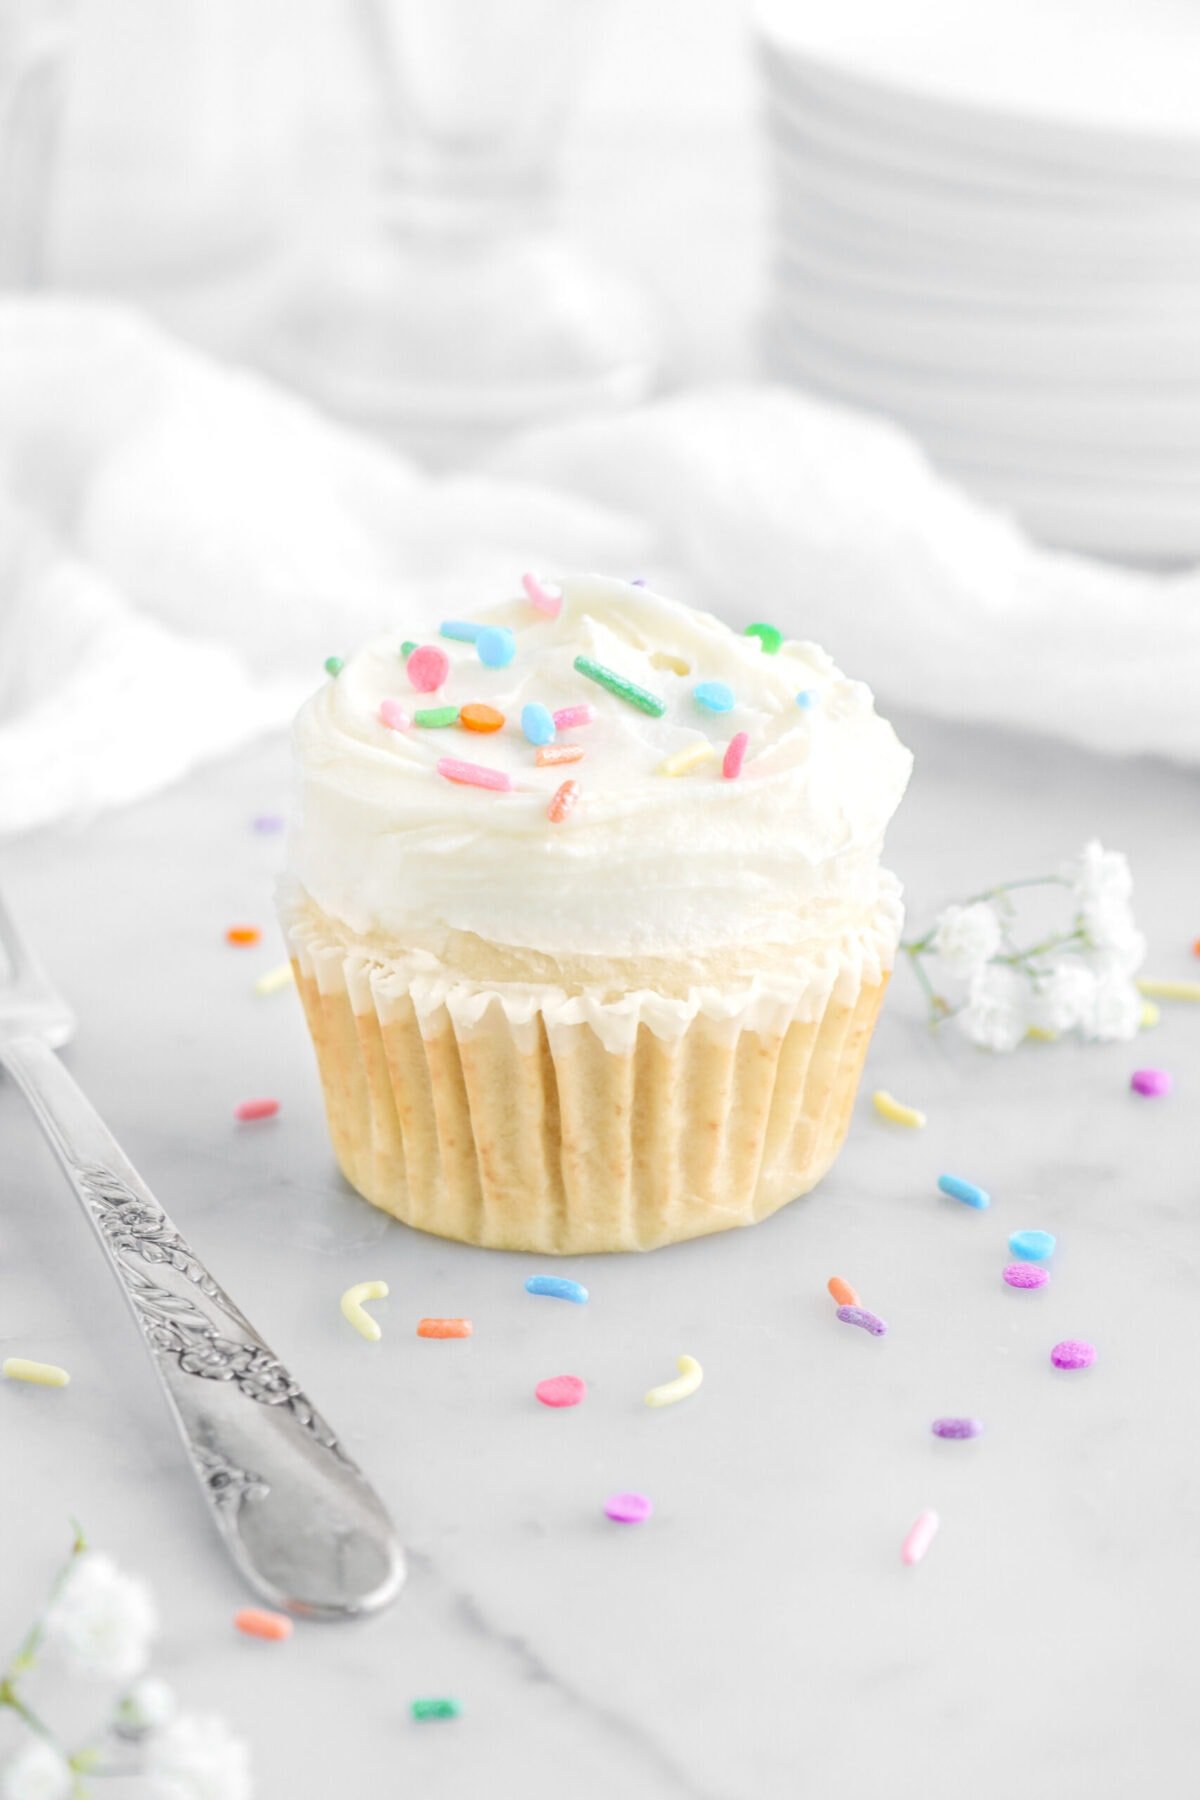 angled close up of vanilla cupcake on marble surface with sprinkles around, a fork beside, and white flowers behind.